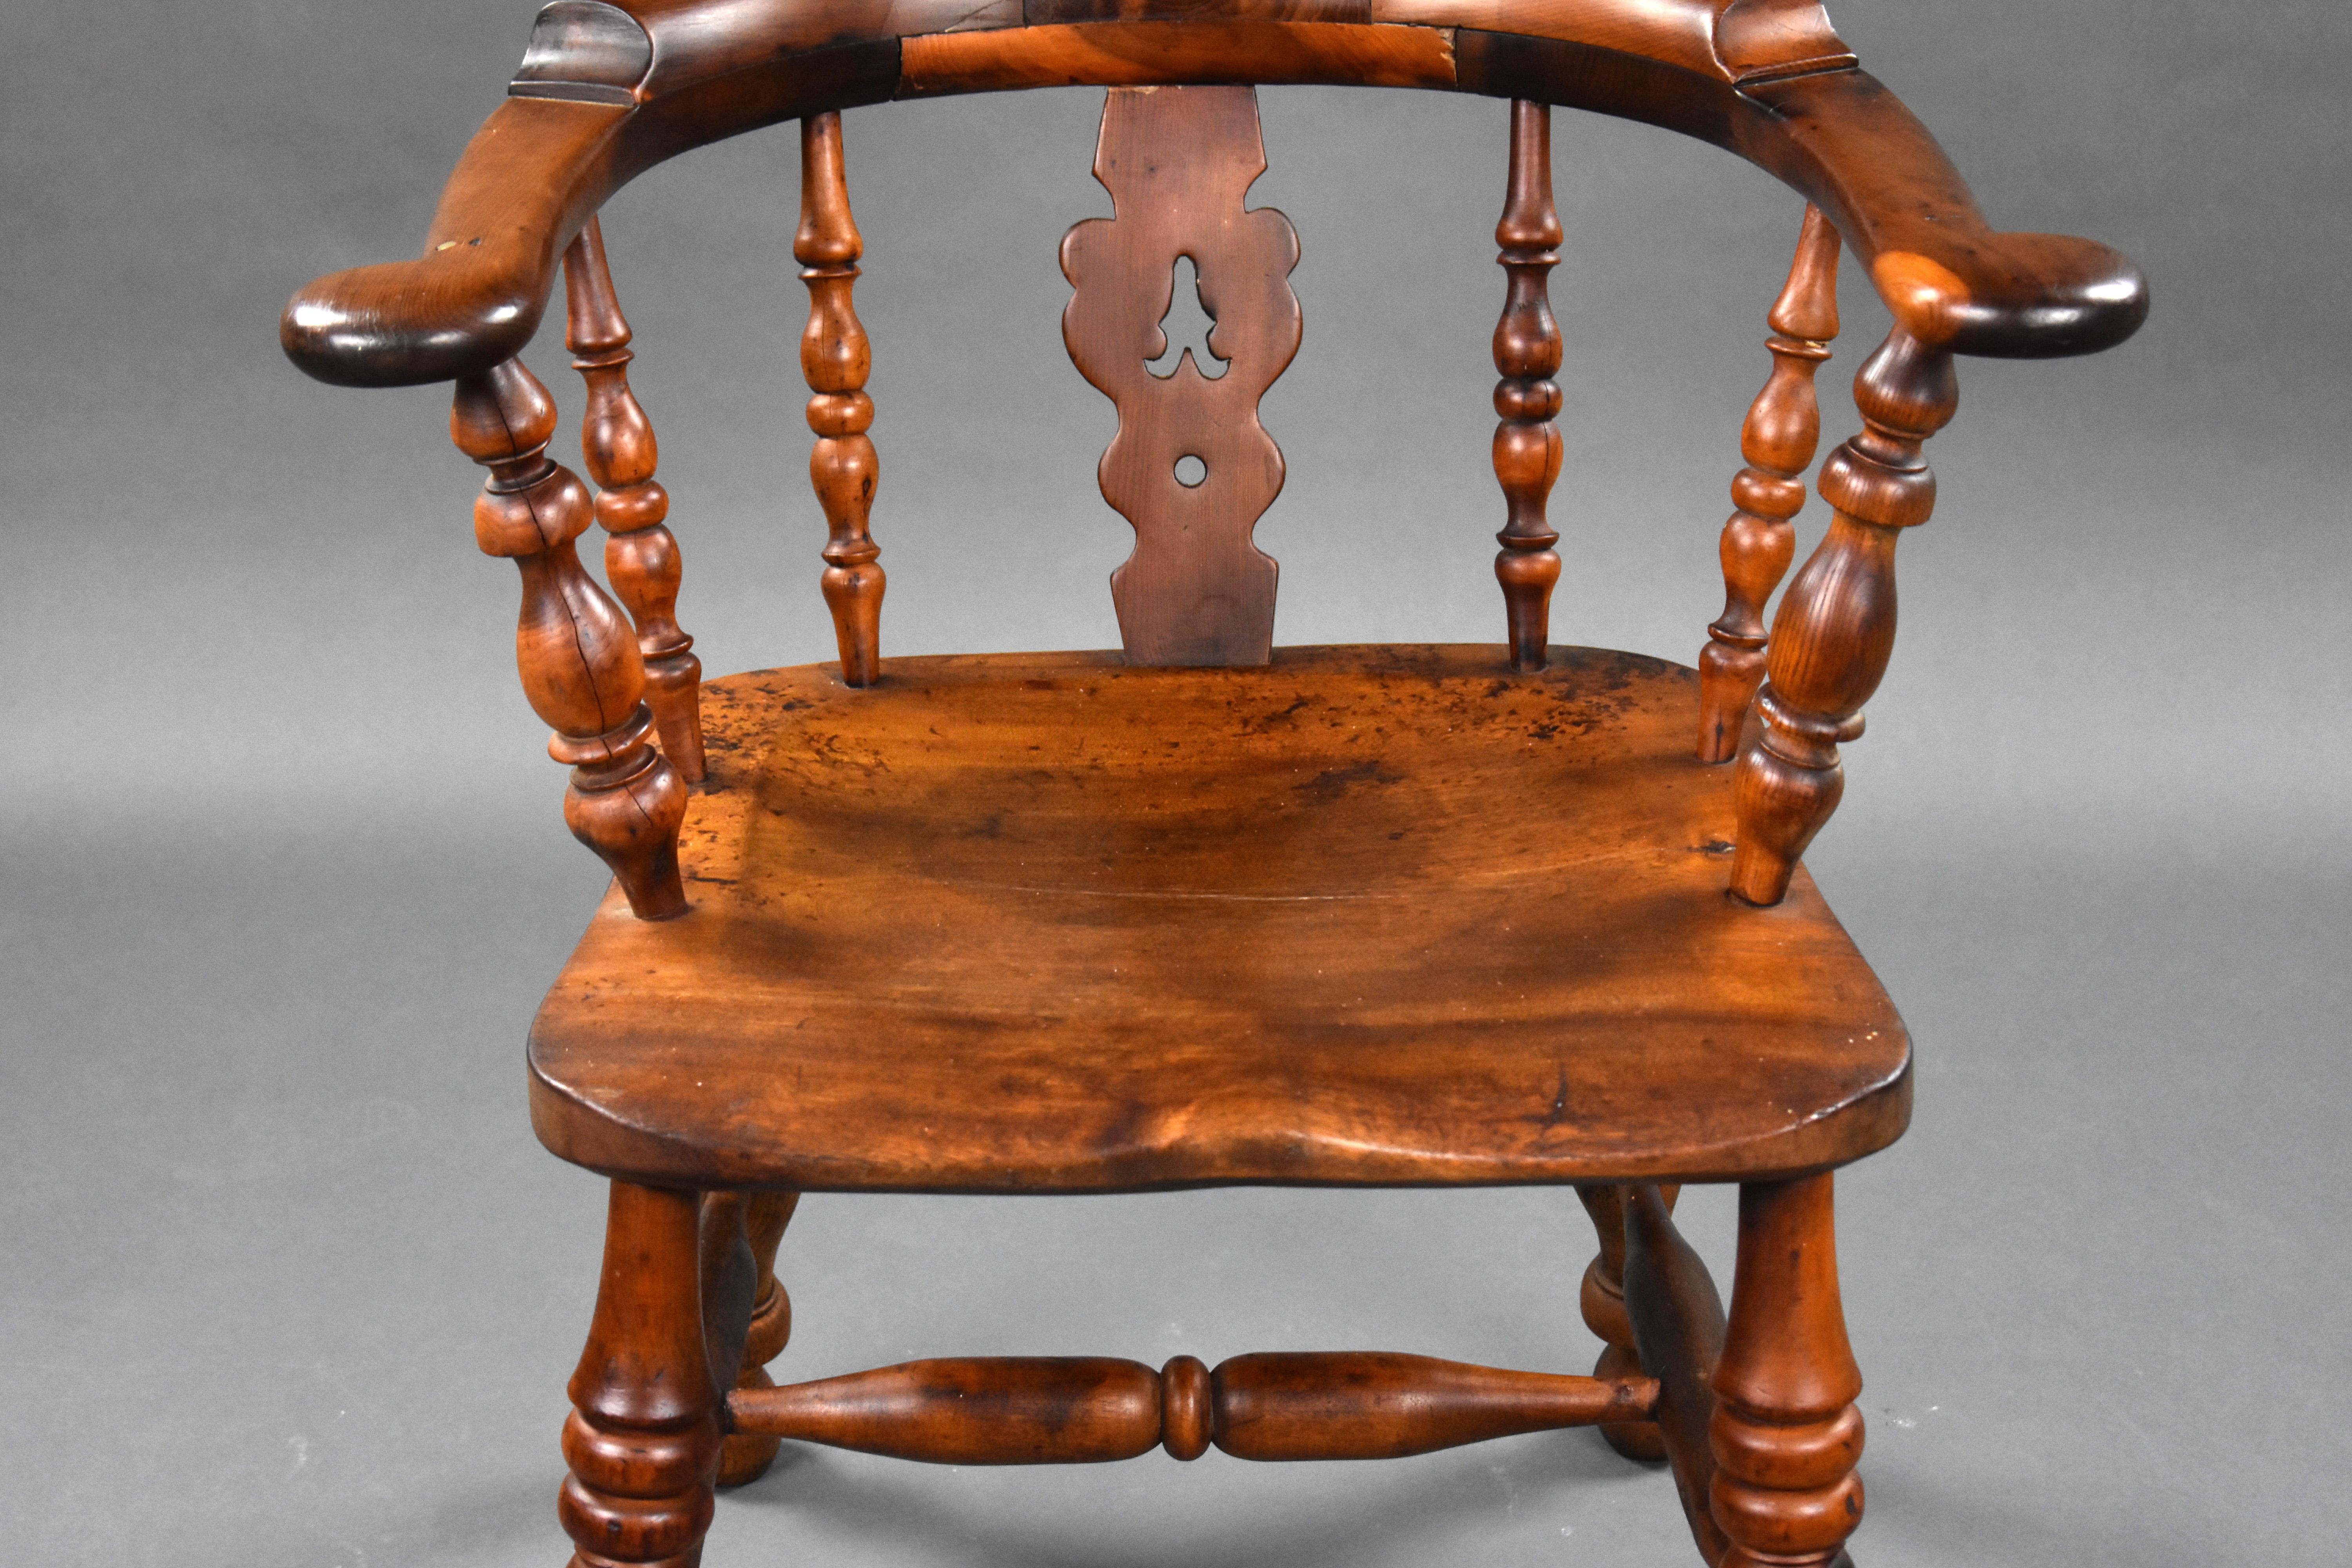 19th Century English Yew Wood High Back Broad Arm Windsor Chair For Sale 4